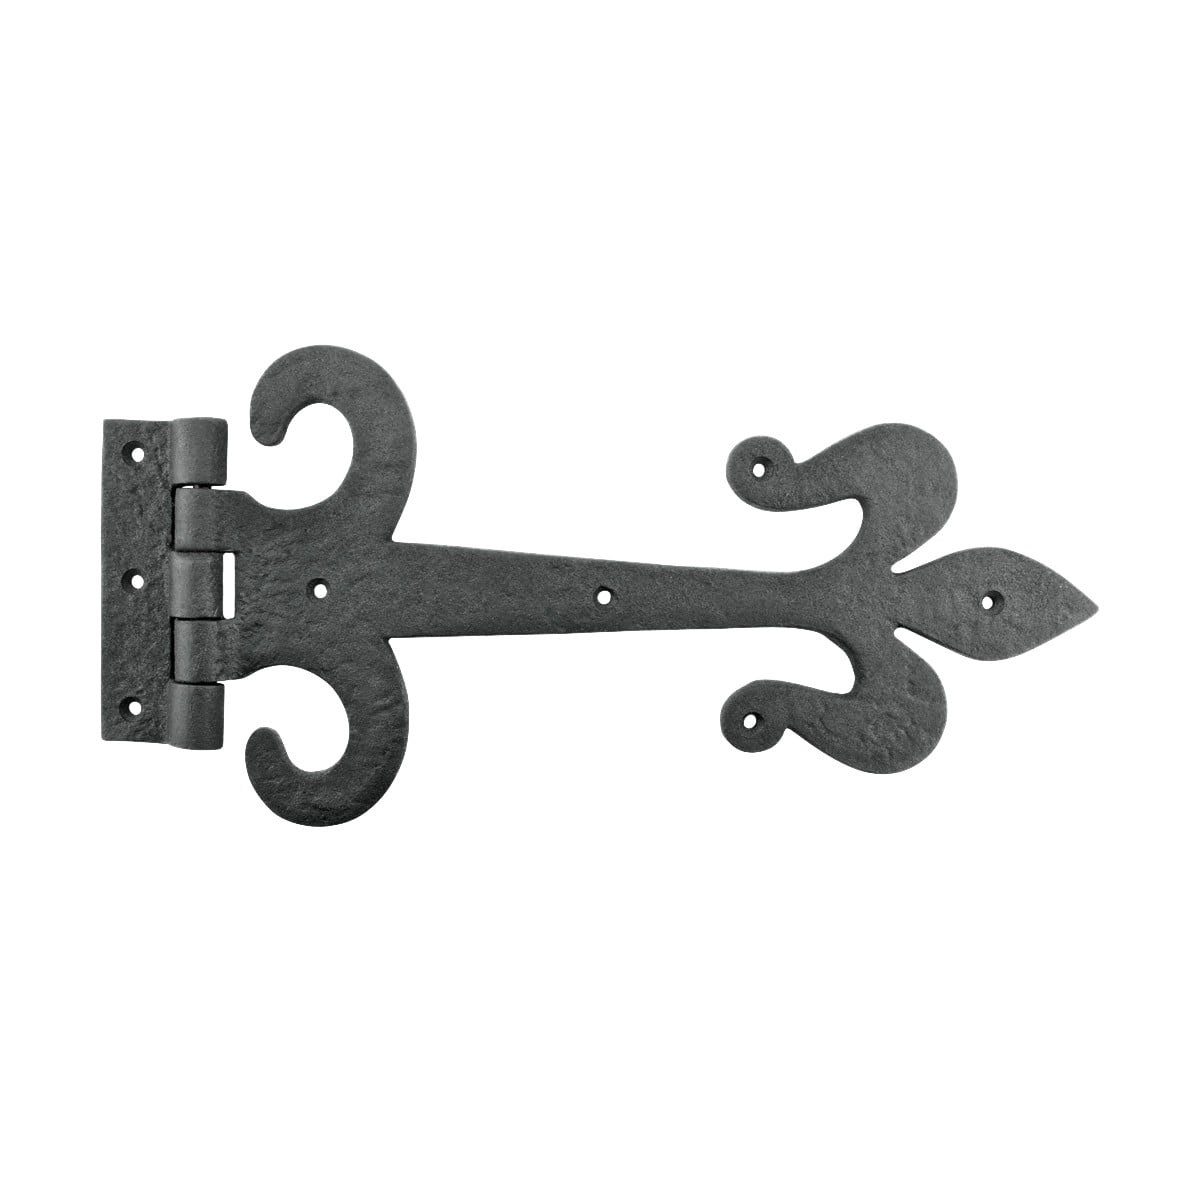 New Light Duty Black Cast Iron Strap Stable Hinge Barn Door Gate Fixed Pin Style 